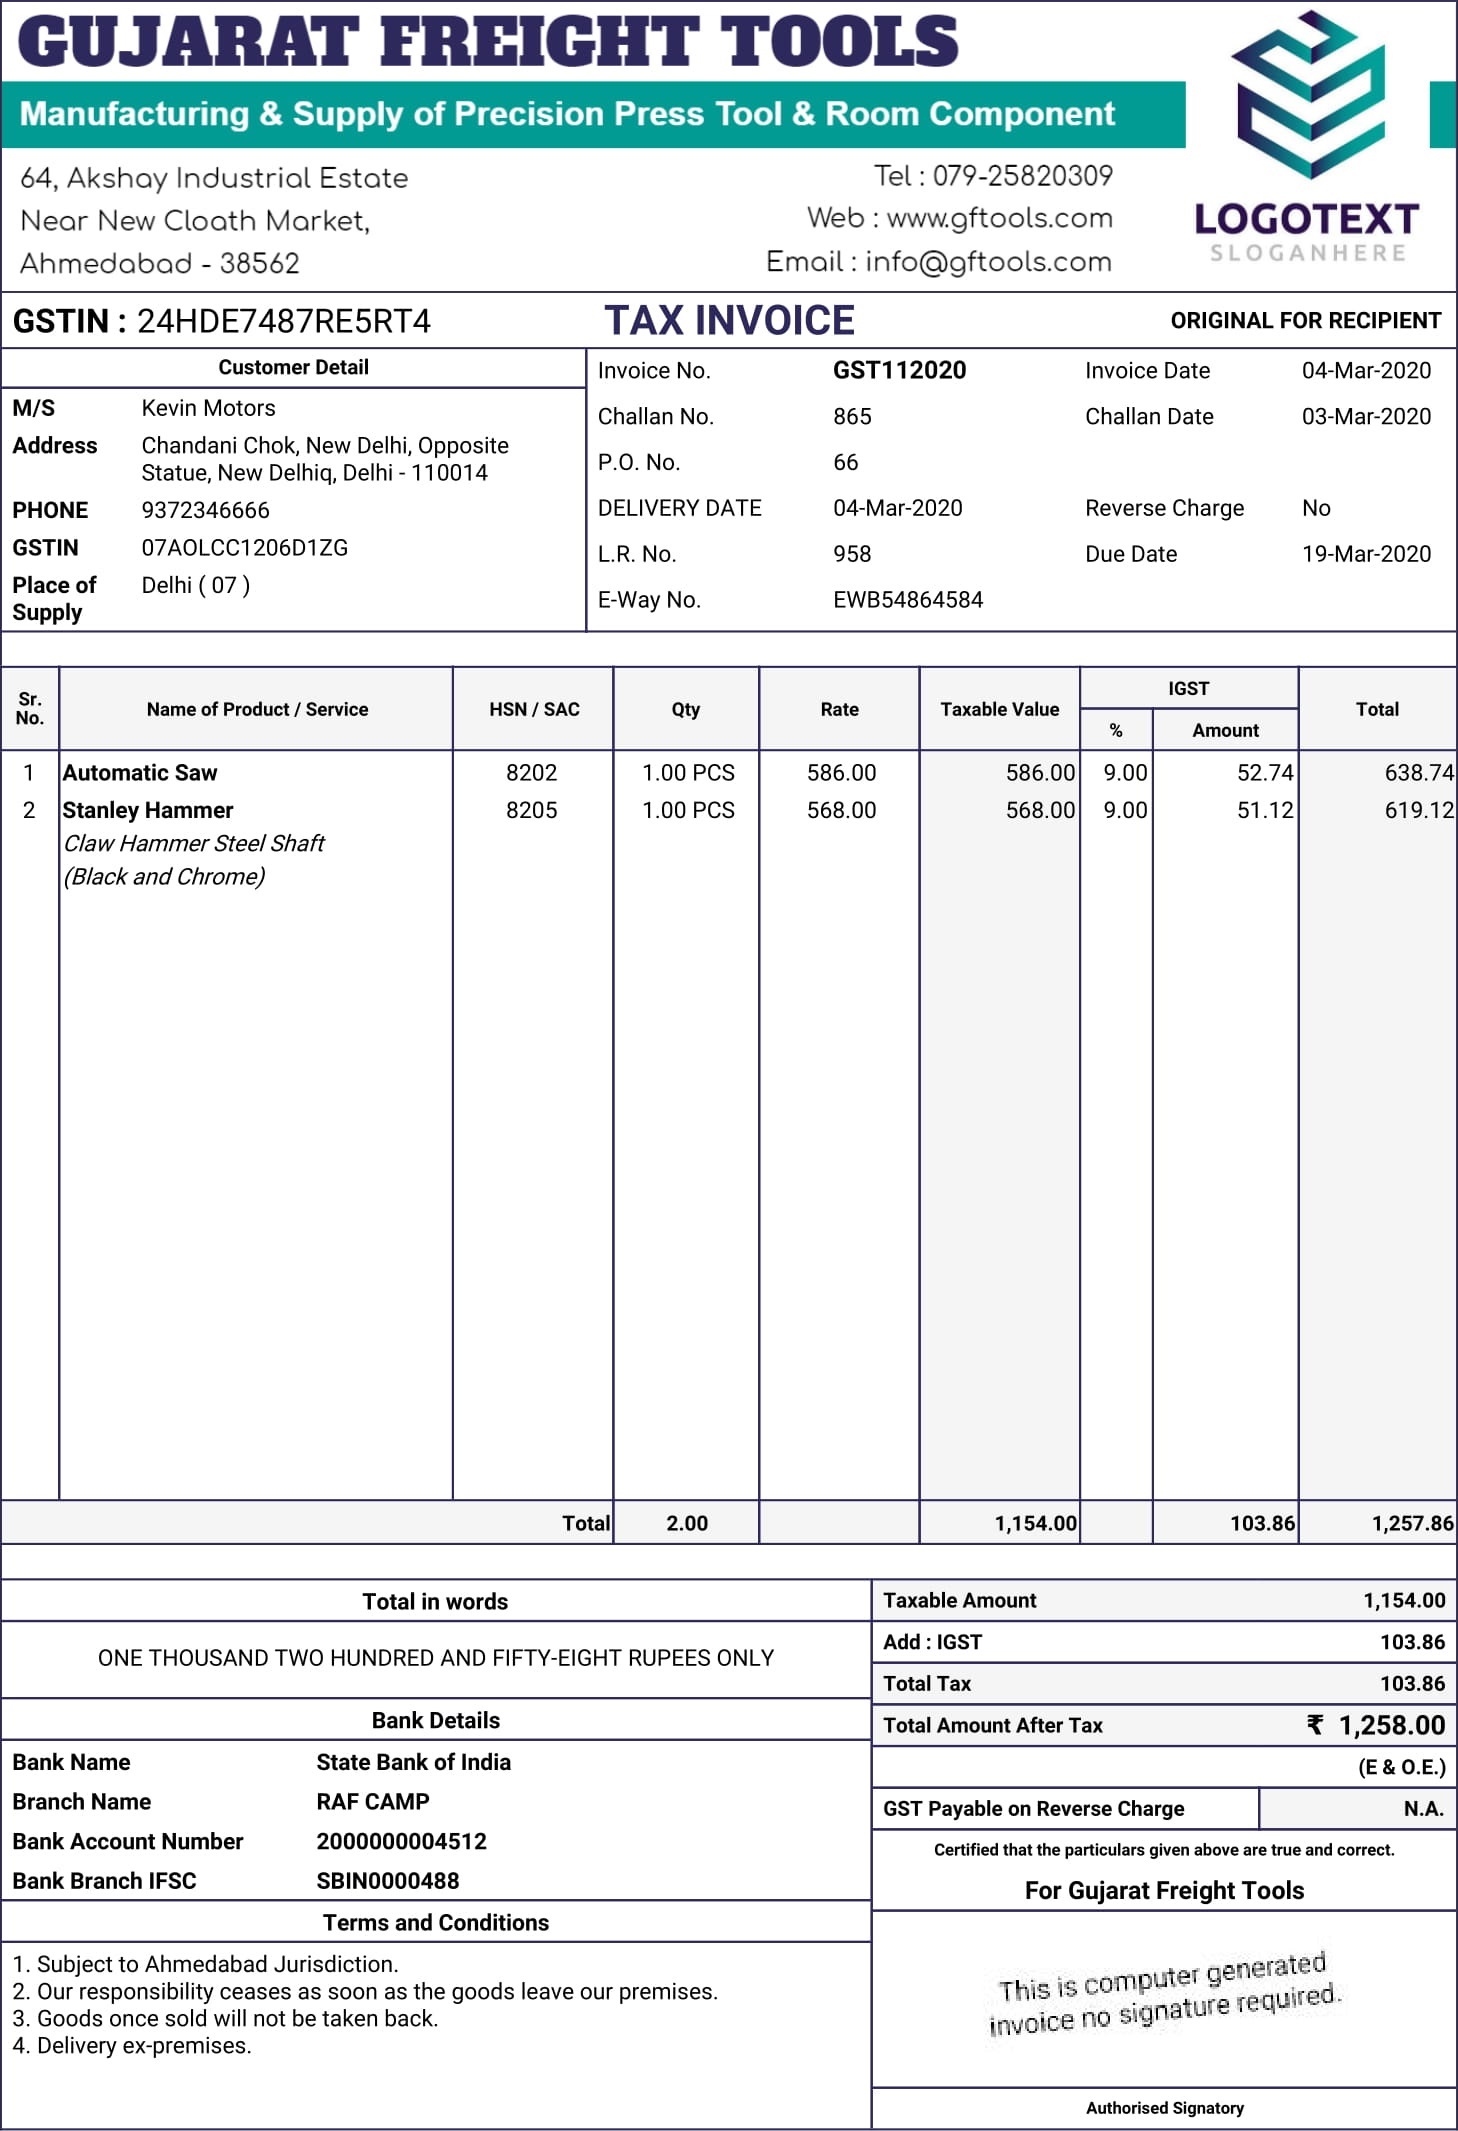 Sample Image For Gst Bill Invoice Template Ideas Riset